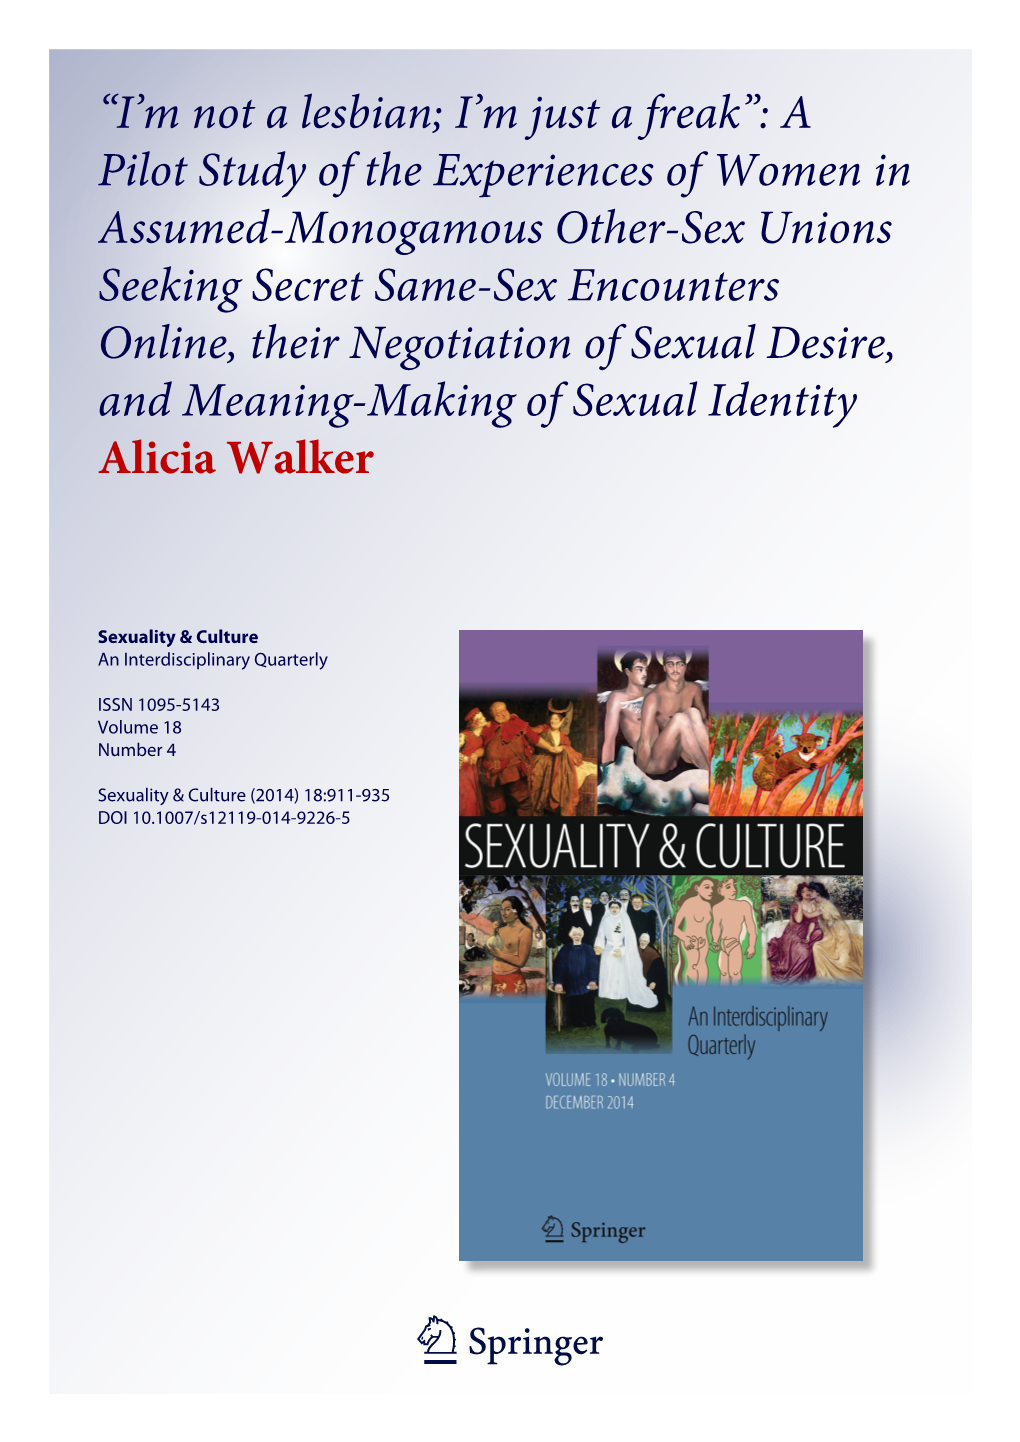 “I'm Not a Lesbian; I'm Just a Freak”: a Pilot Study of the Experiences of Women in Assumed-Monogamous Other-Sex Unions